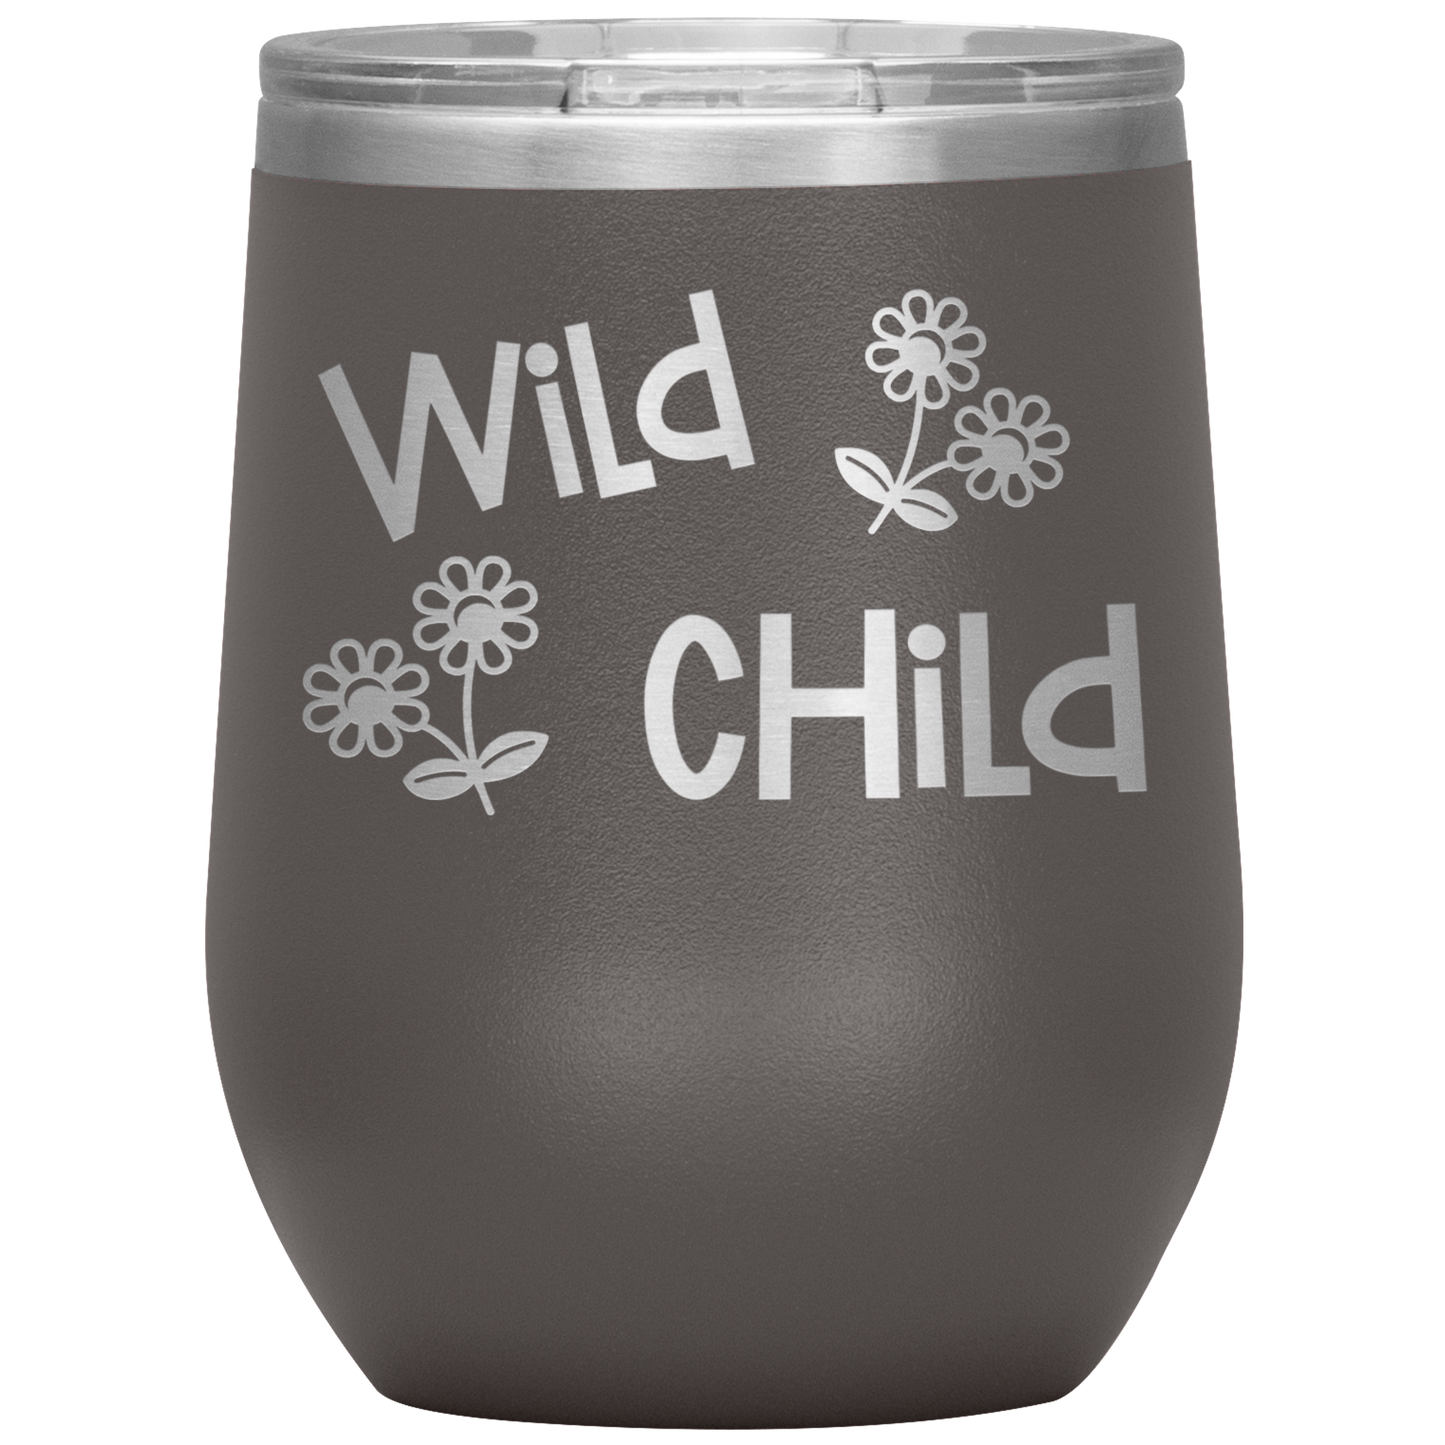 "Wild Child" 12 oz. Insulated Stainless Steel Wine Tumbler with Lid